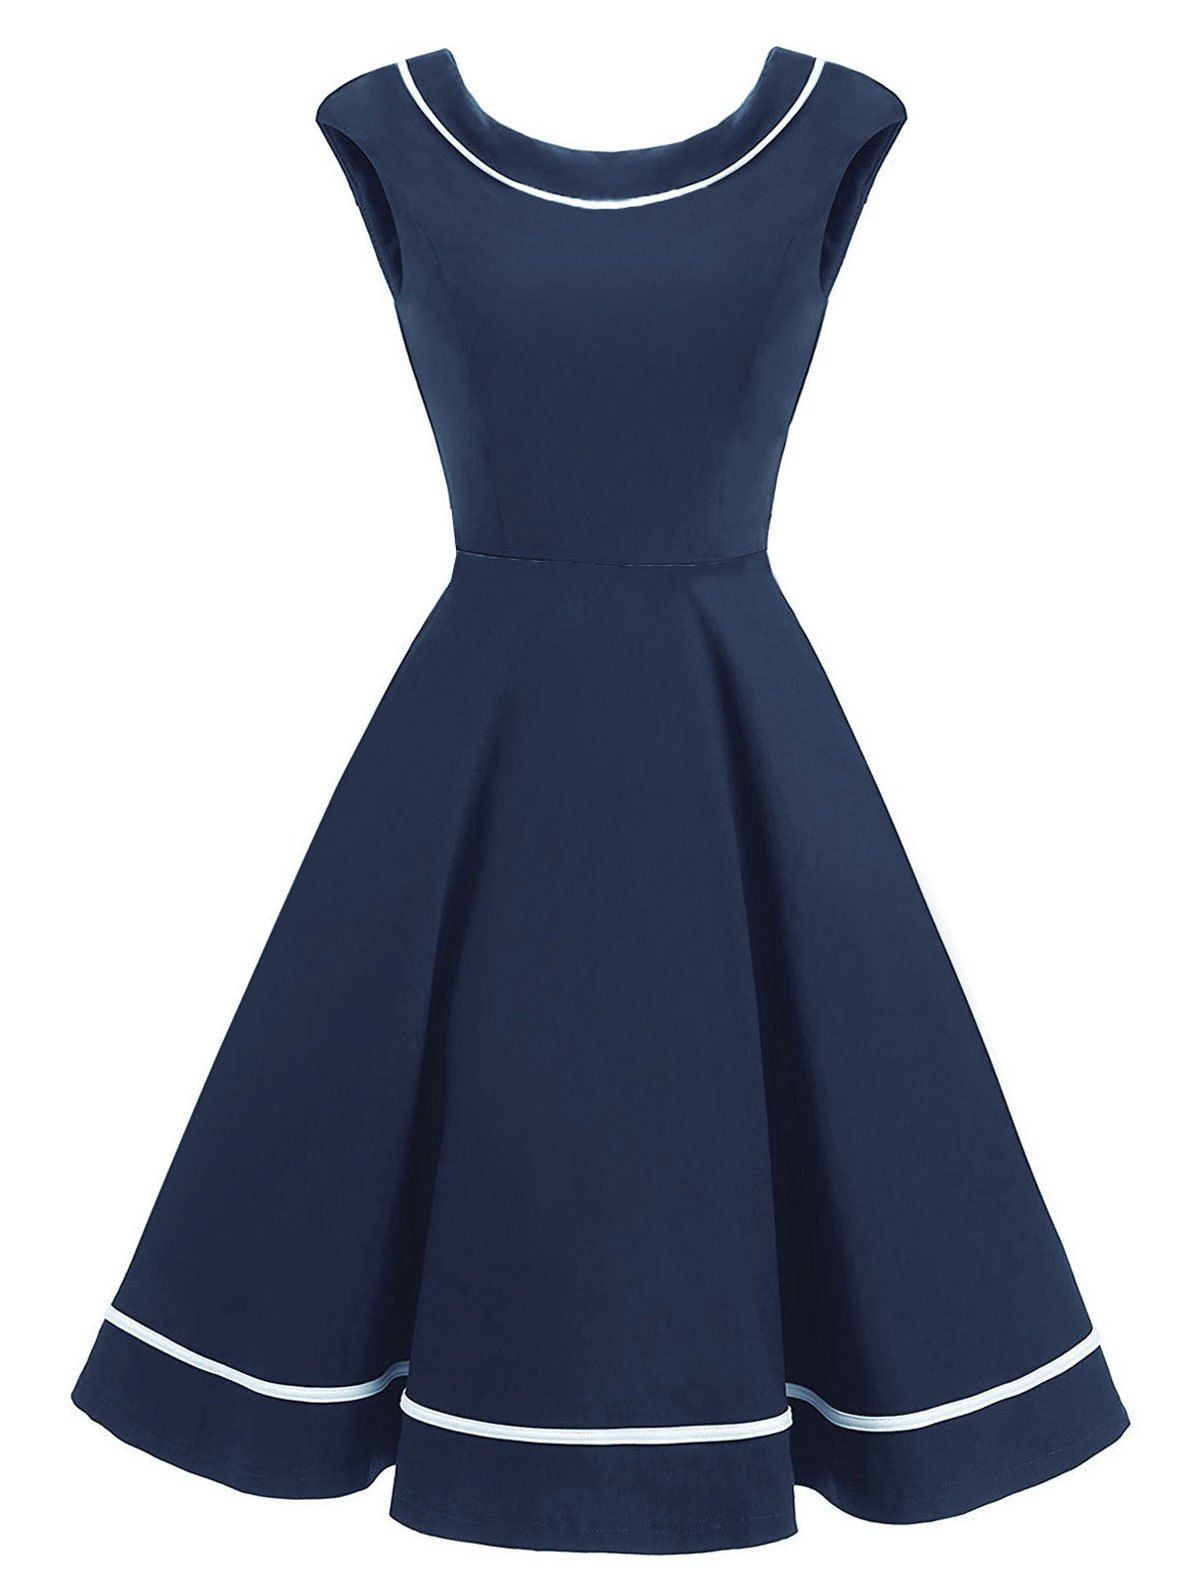 [17% OFF] 2021 Vintage Sleeveless Pinup Swing Dress In DEEP BLUE ...